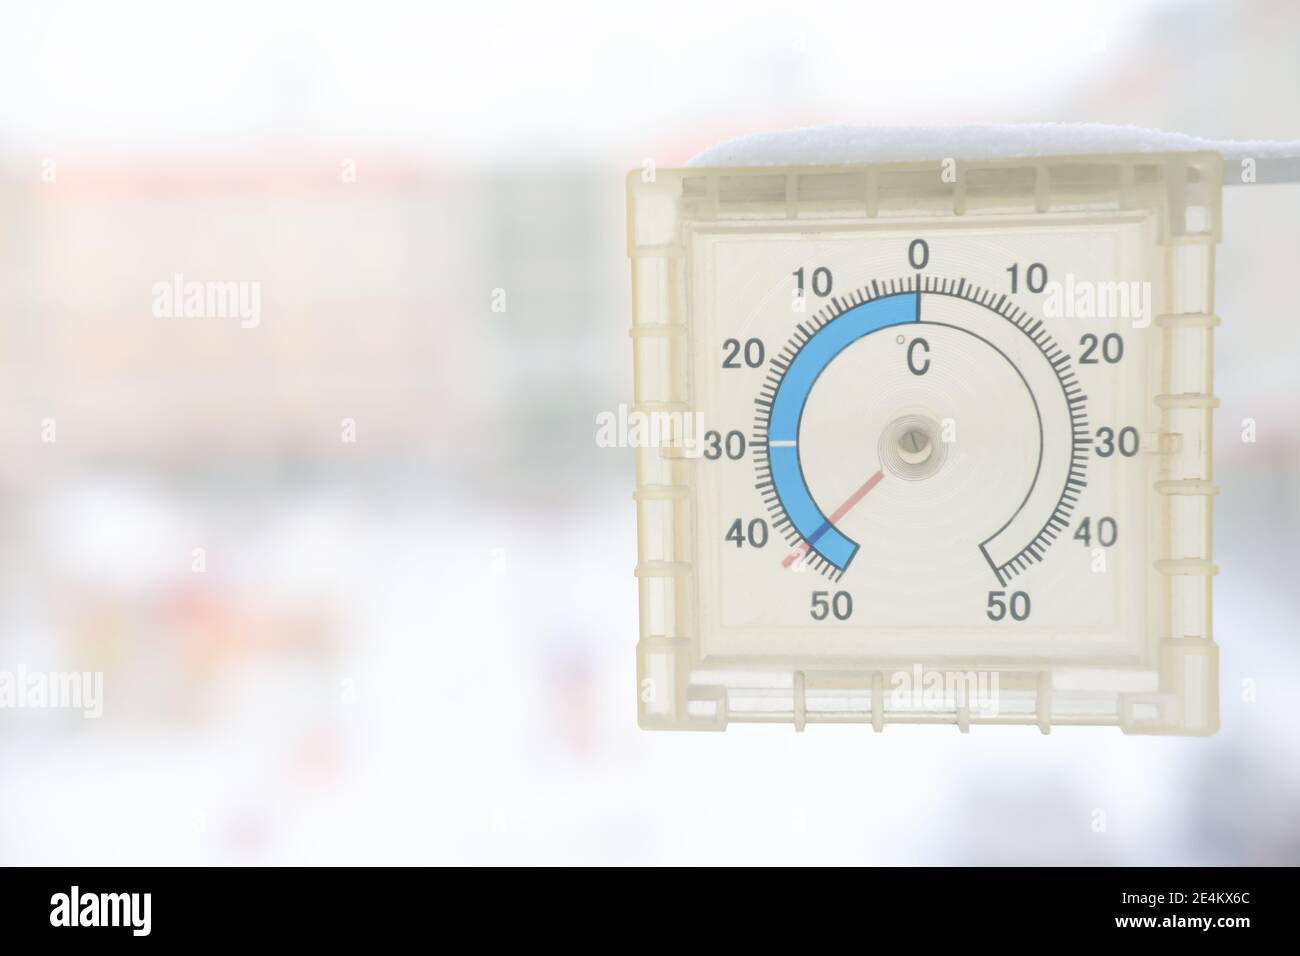 https://c8.alamy.com/comp/2E4KX6C/outdoor-thermometer-showing-extremely-cold-temperature-winter-cold-weather-in-siberia-selsius-scale-copy-space-45-degrees-below-zero-weather-forecast-climate-change-2E4KX6C.jpg